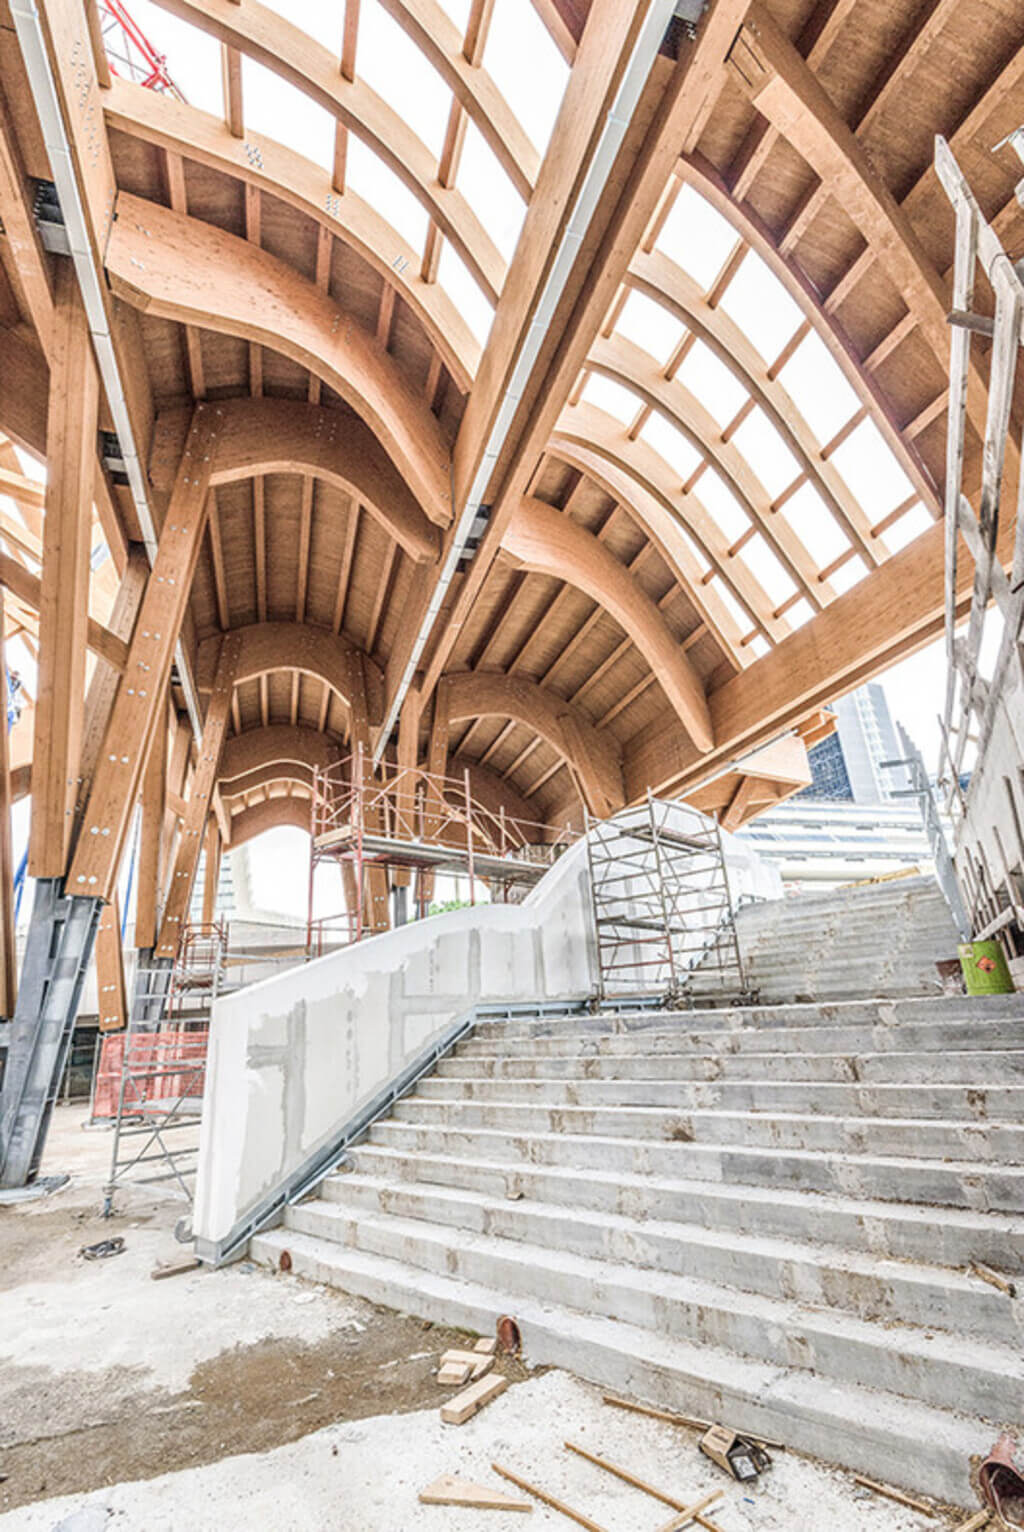 Reveal EMBT's Timber Central Station in Naples